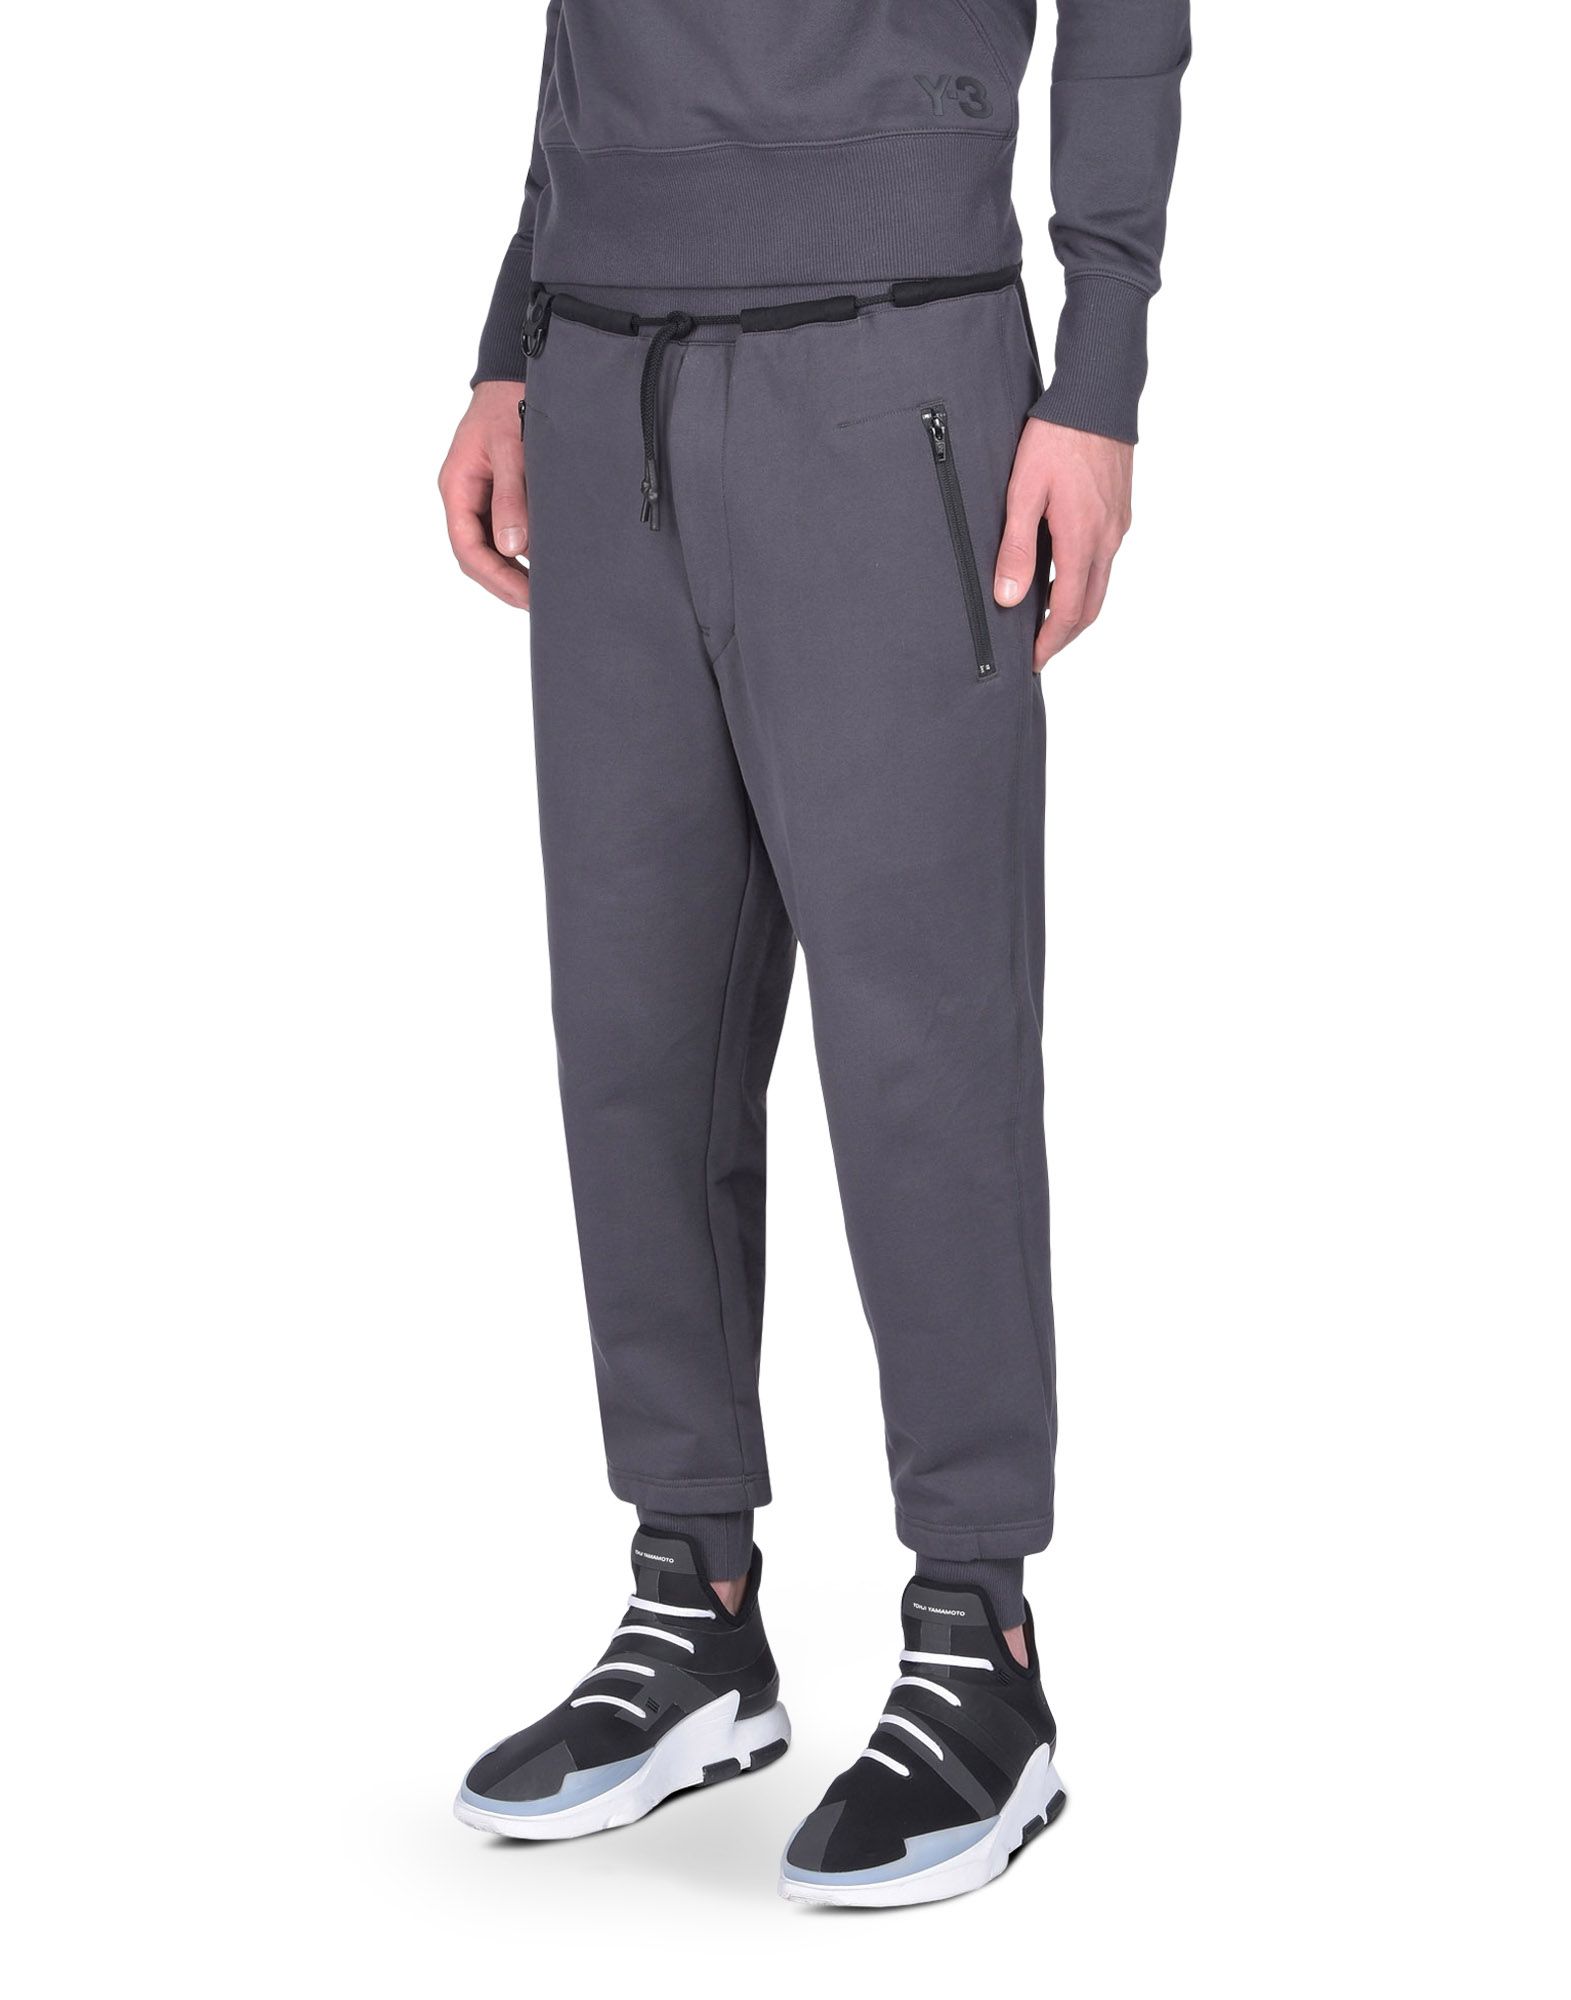 Y 3 BRANDED FT PANT for Men | Adidas Y-3 Official Store